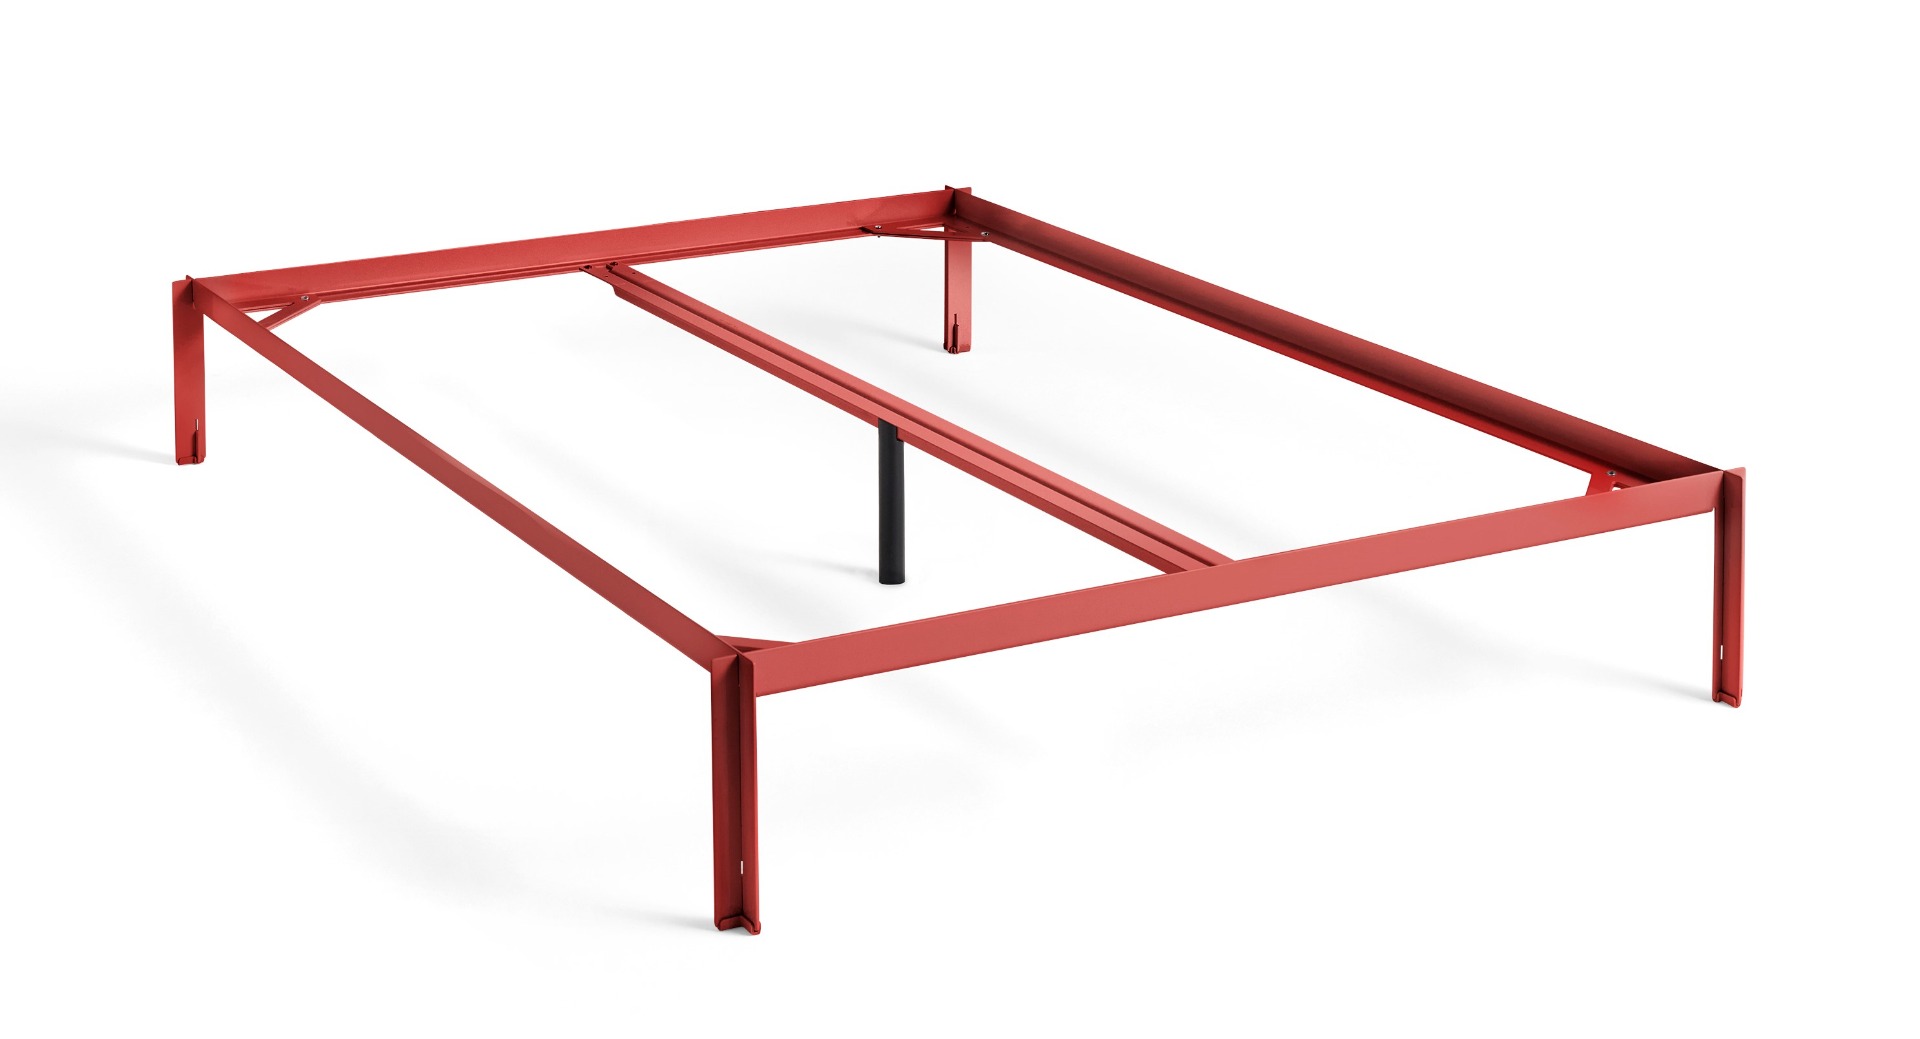 https://www.fundesign.nl/media/catalog/product/a/b/ab073-b559-ah36_connect_bed_w140xl200xh30_with_support_bar_maroon_red.jpg